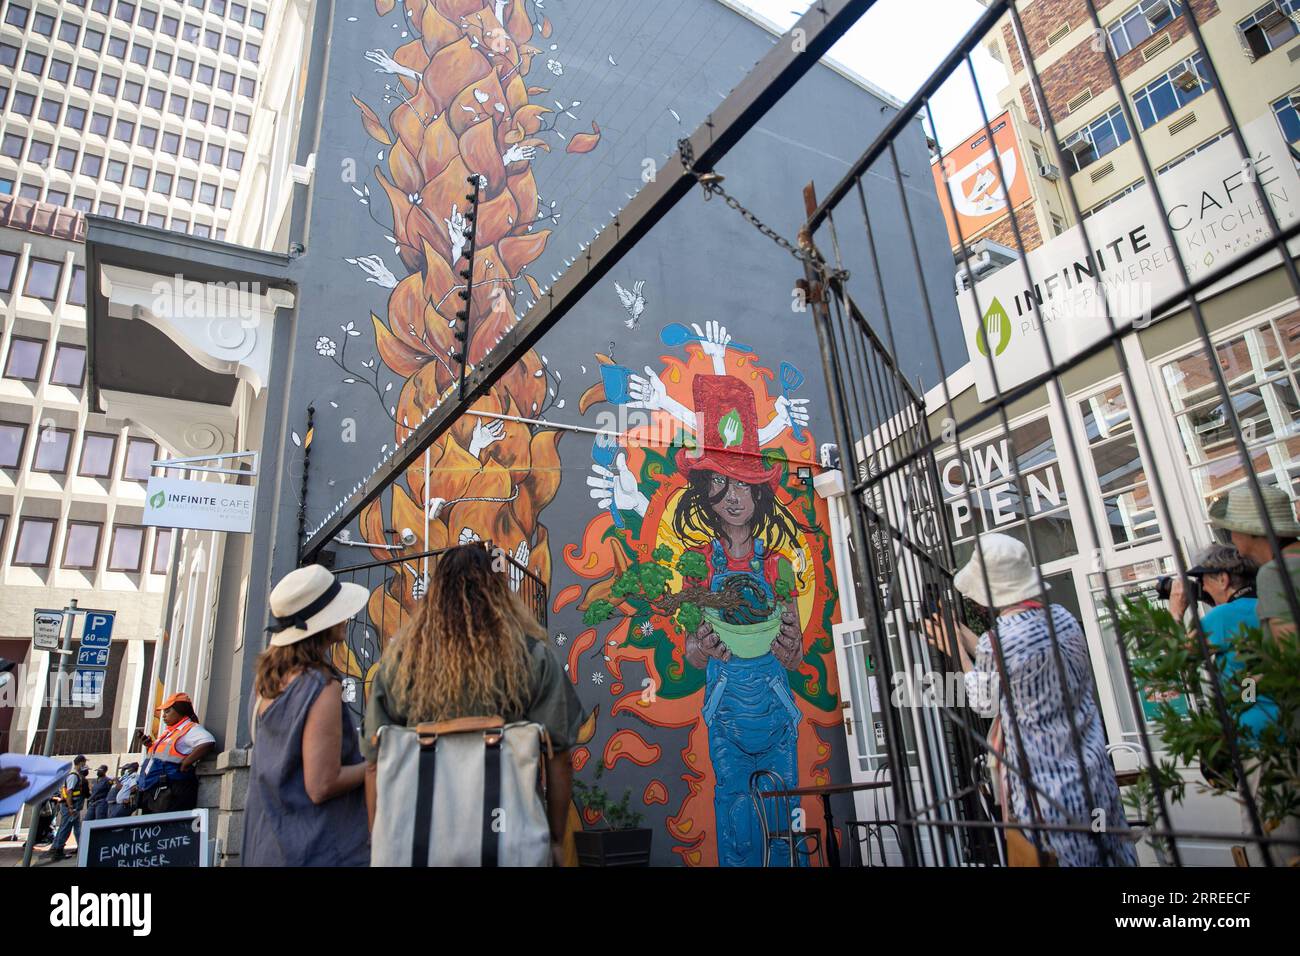 220223 -- CAPE TOWN, Feb. 23, 2022 -- Tourists view a mural during the International Public Arts Festival in Cape Town, South Africa, on Feb. 23, 2022. The sixth edition of the International Public Arts Festival, Africa s largest street art festival, is held from Wednesday to Sunday in Cape Town, with new large murals to beautify walls in the central business district.  SOUTH AFRICA-CAPE TOWN-STREET ART FESTIVAL LyuxTianran PUBLICATIONxNOTxINxCHN Stock Photo